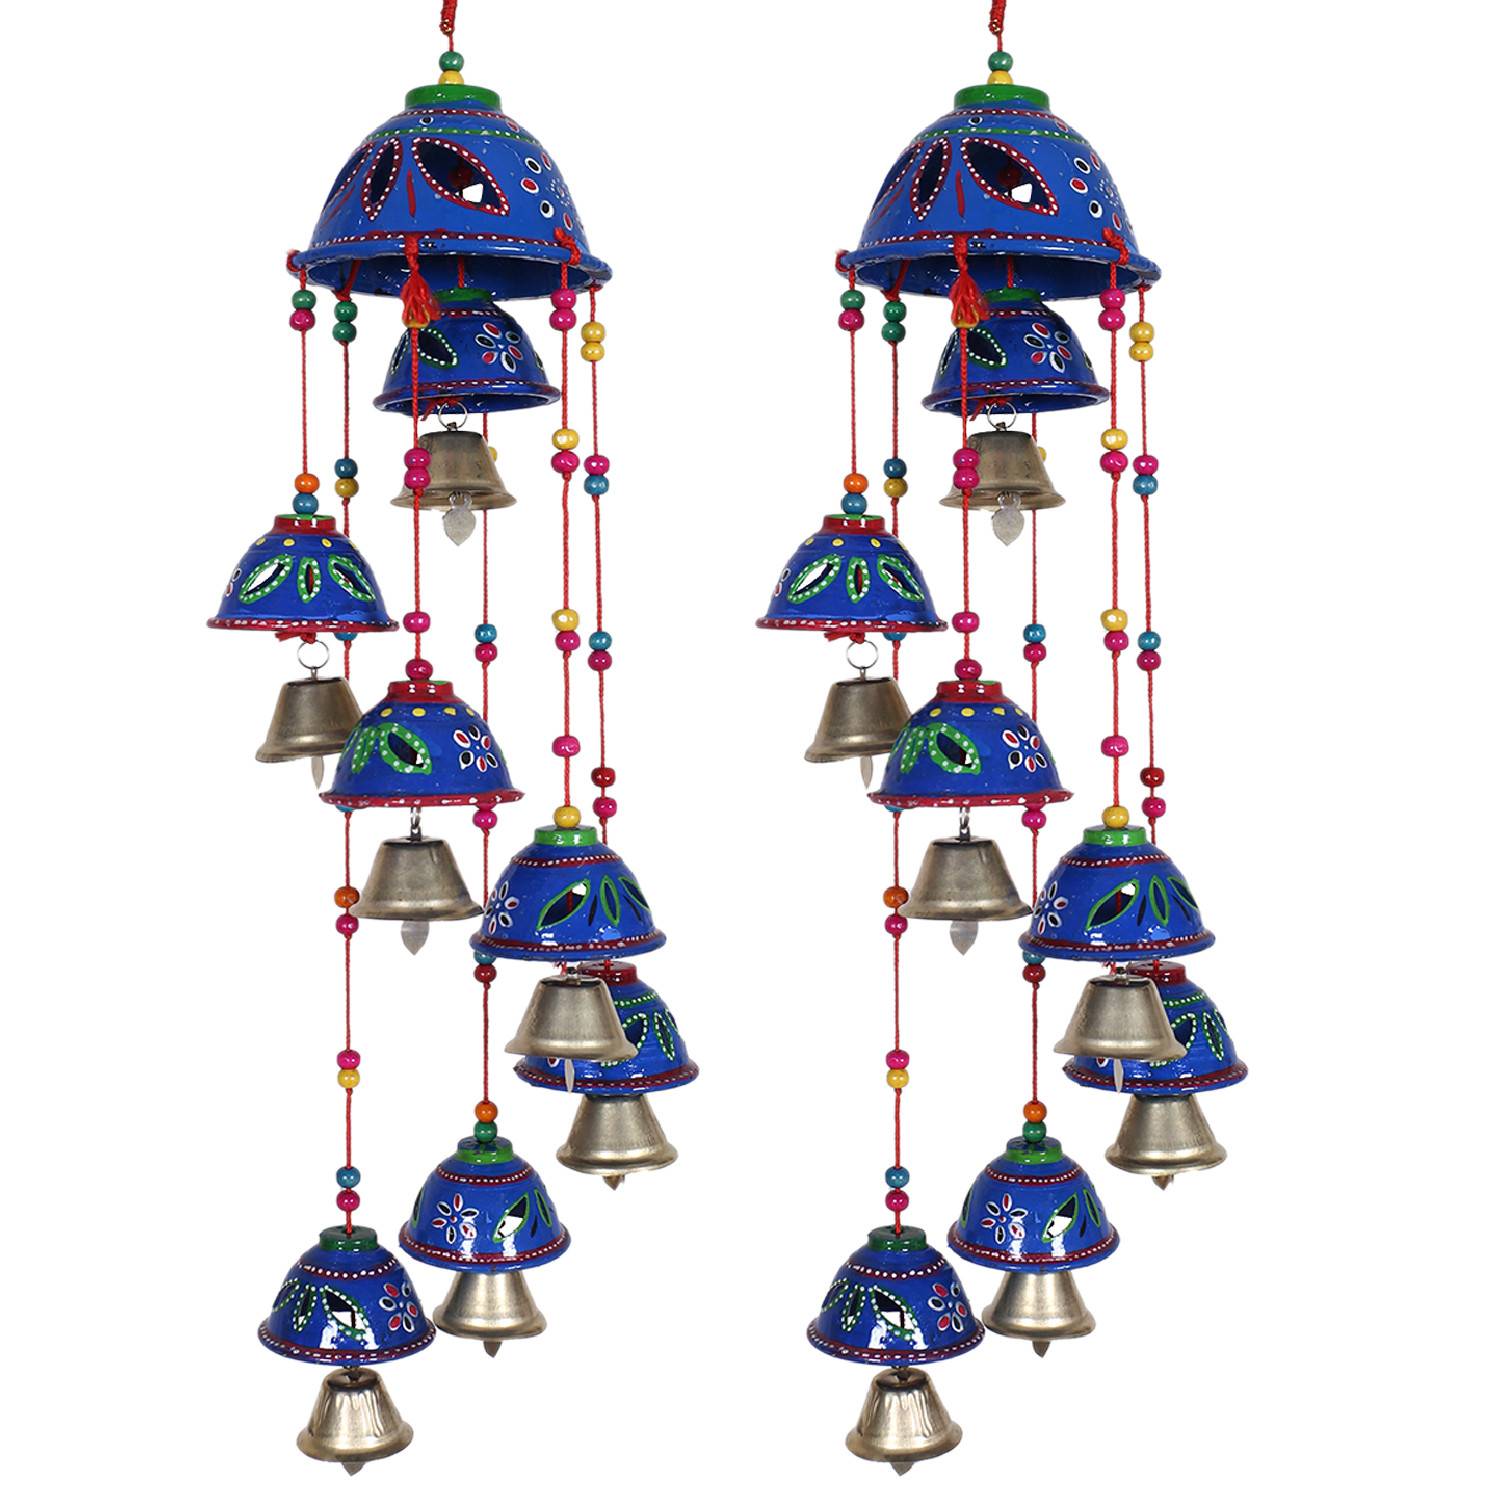 Kuber Industries Rajasthani Design Handcrafted Hanging Windchimes|Latkan With 8 Bells for Home Décor & Positive Energy (Blue)